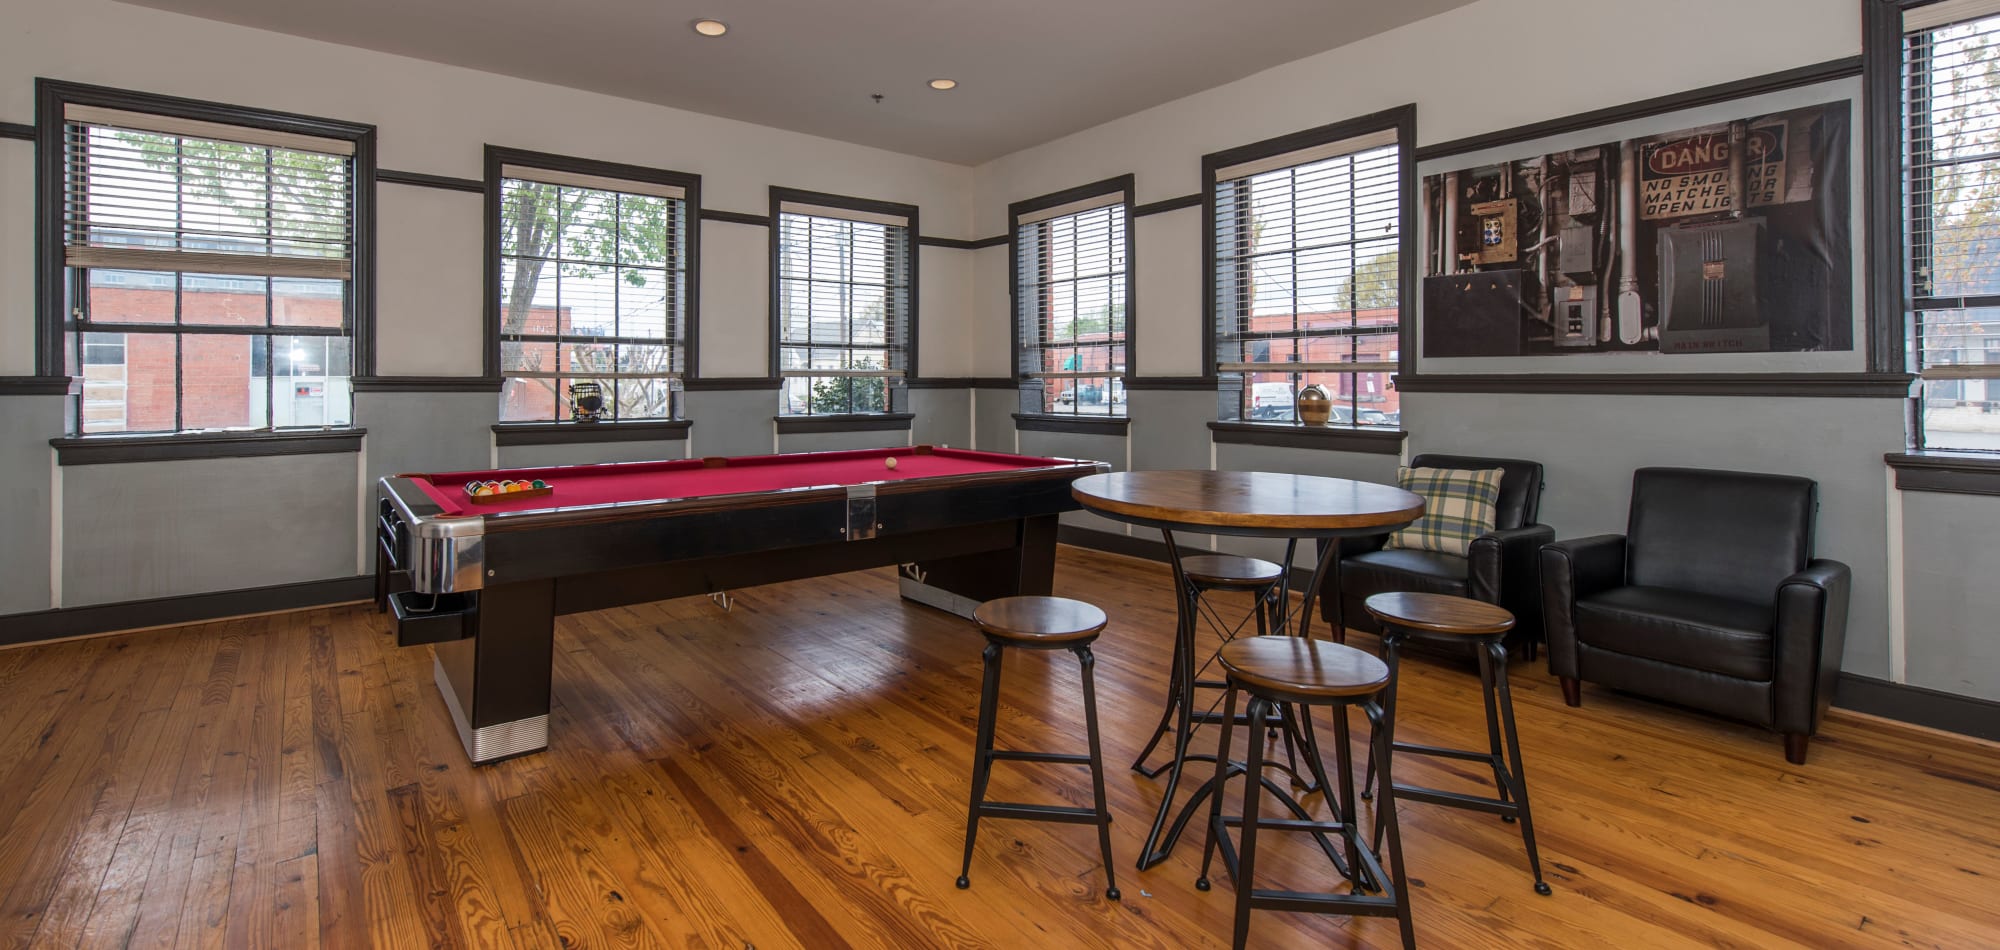 Clubhouse with billiards table at Scott's Edge, Richmond, Virginia